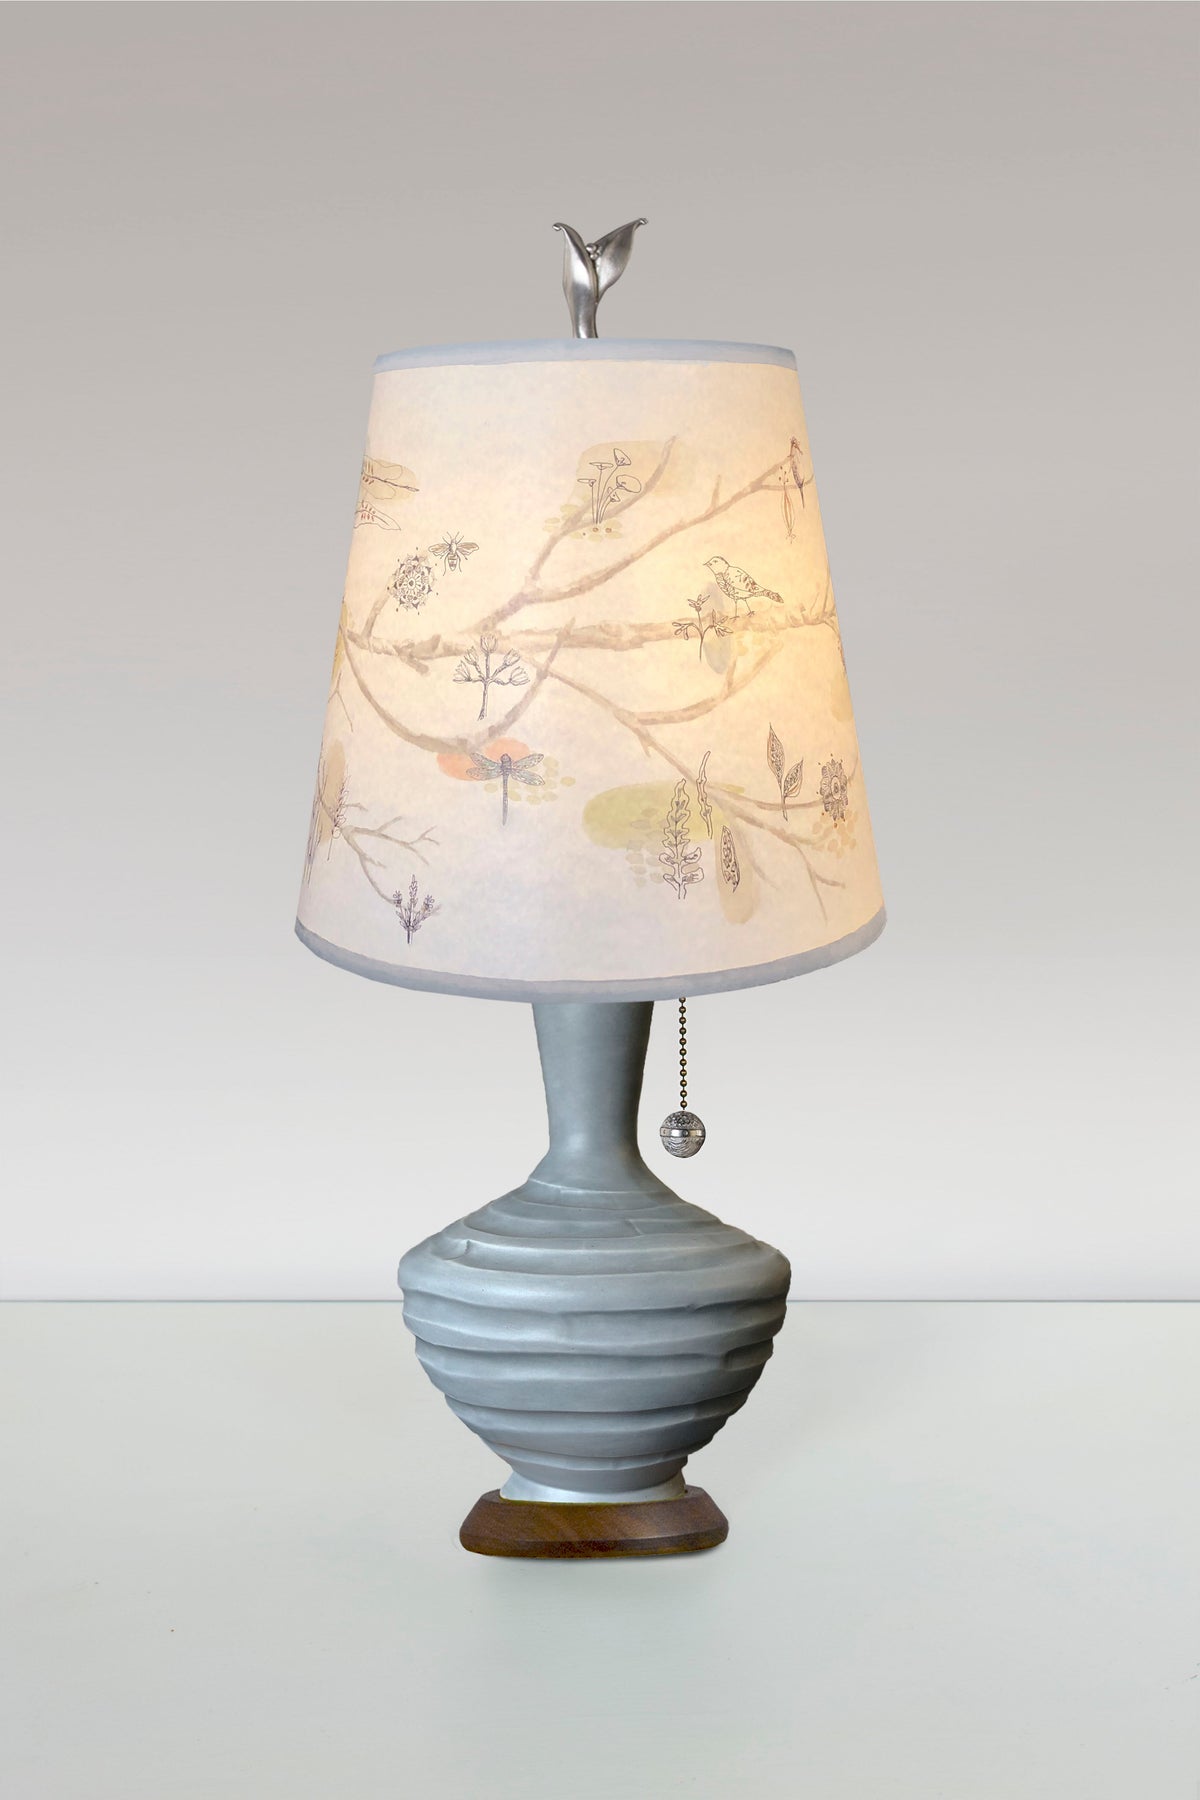 Janna Ugone &amp; Co Table Lamps Ceramic Table Lamp with Small Drum Shade in Artful Branch